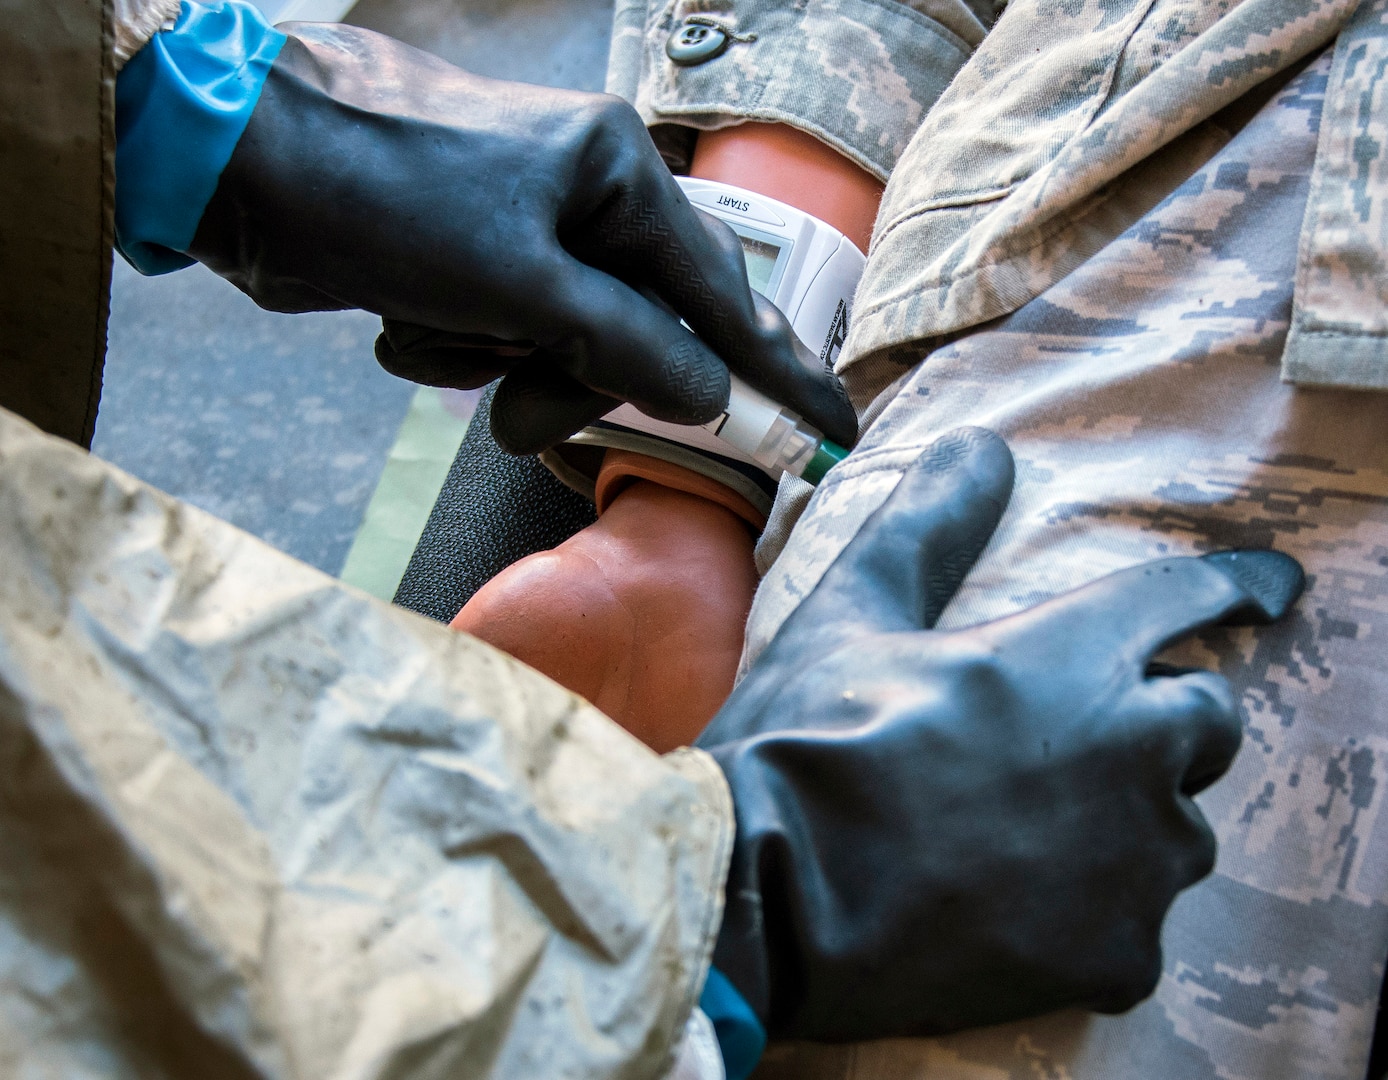 An airman uses an auto-injector on a medical mannequin during training.